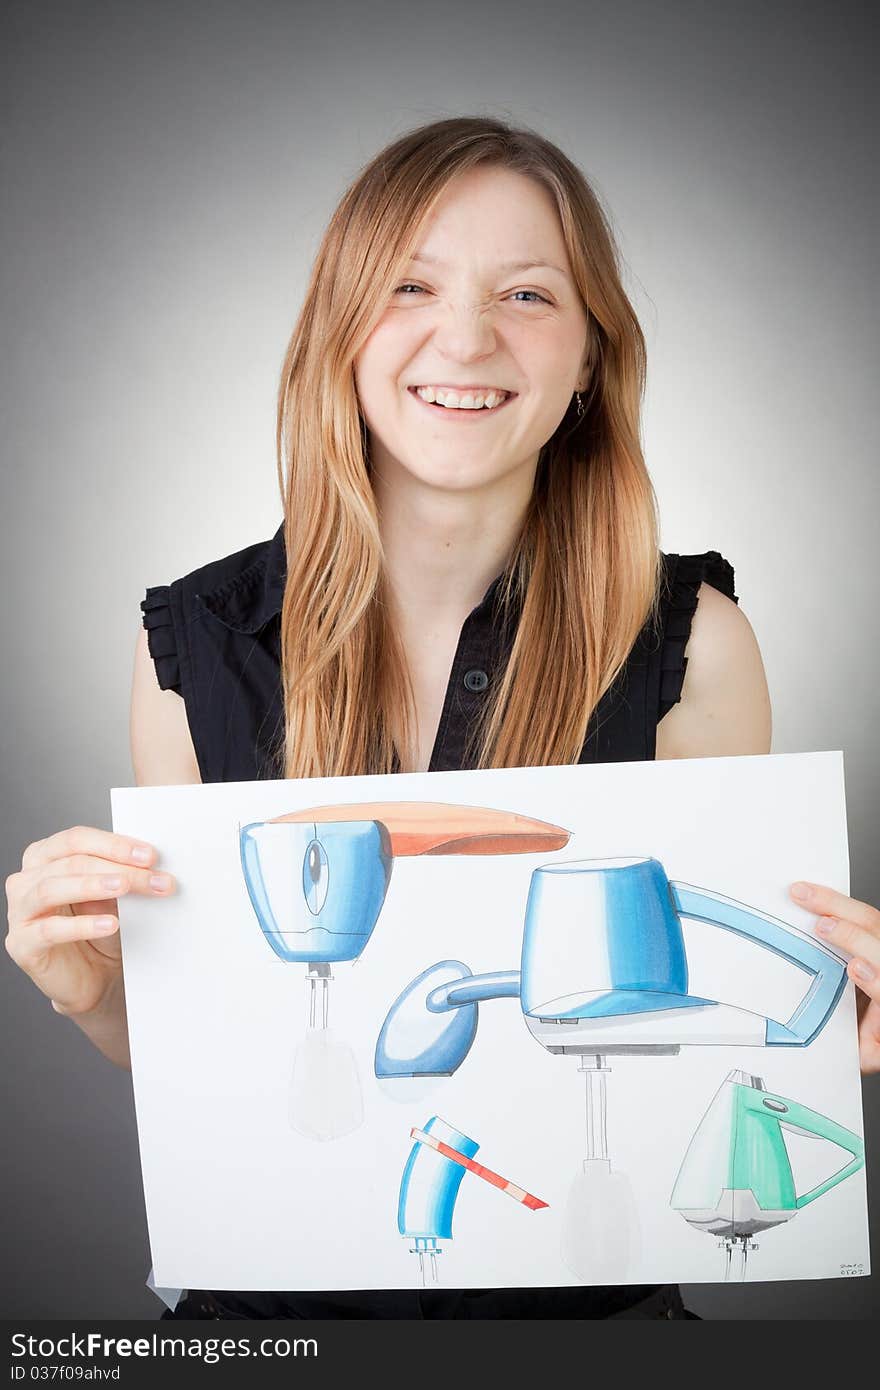 Young Design Engineer Woman Shows a Design Plan, with Grey Background